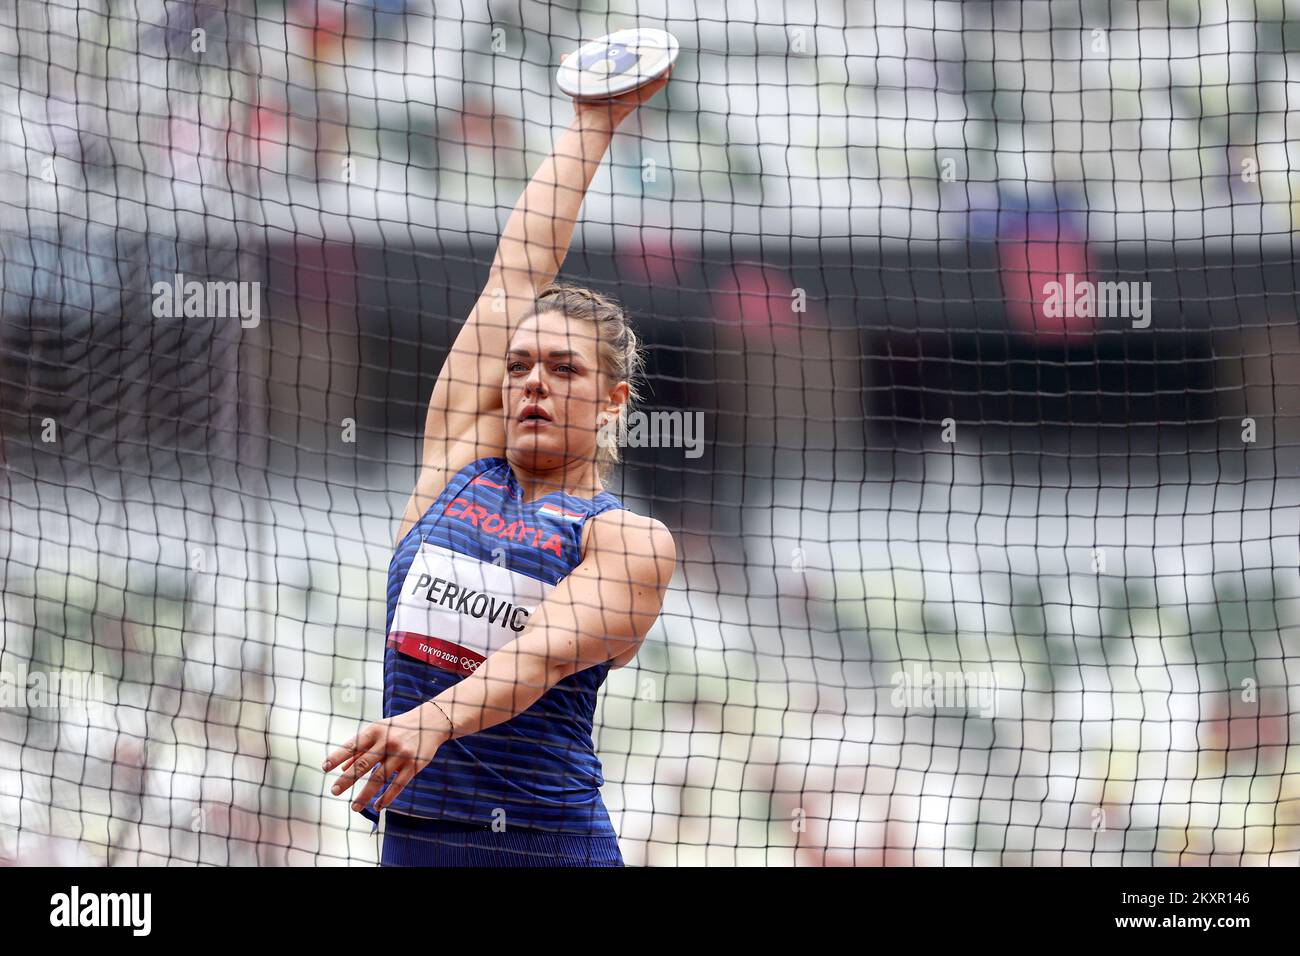 TOKYO, JAPAN - JULY 31: Sandra Perkovic of Team Croatia competes in the Women's Discus Throw Qualification on day eight of the Tokyo 2020 Olympic Games at Olympic Stadium on July 31, 2021 in Tokyo, Japan. Photo: Igor Kralj/PIXSELL Stock Photo